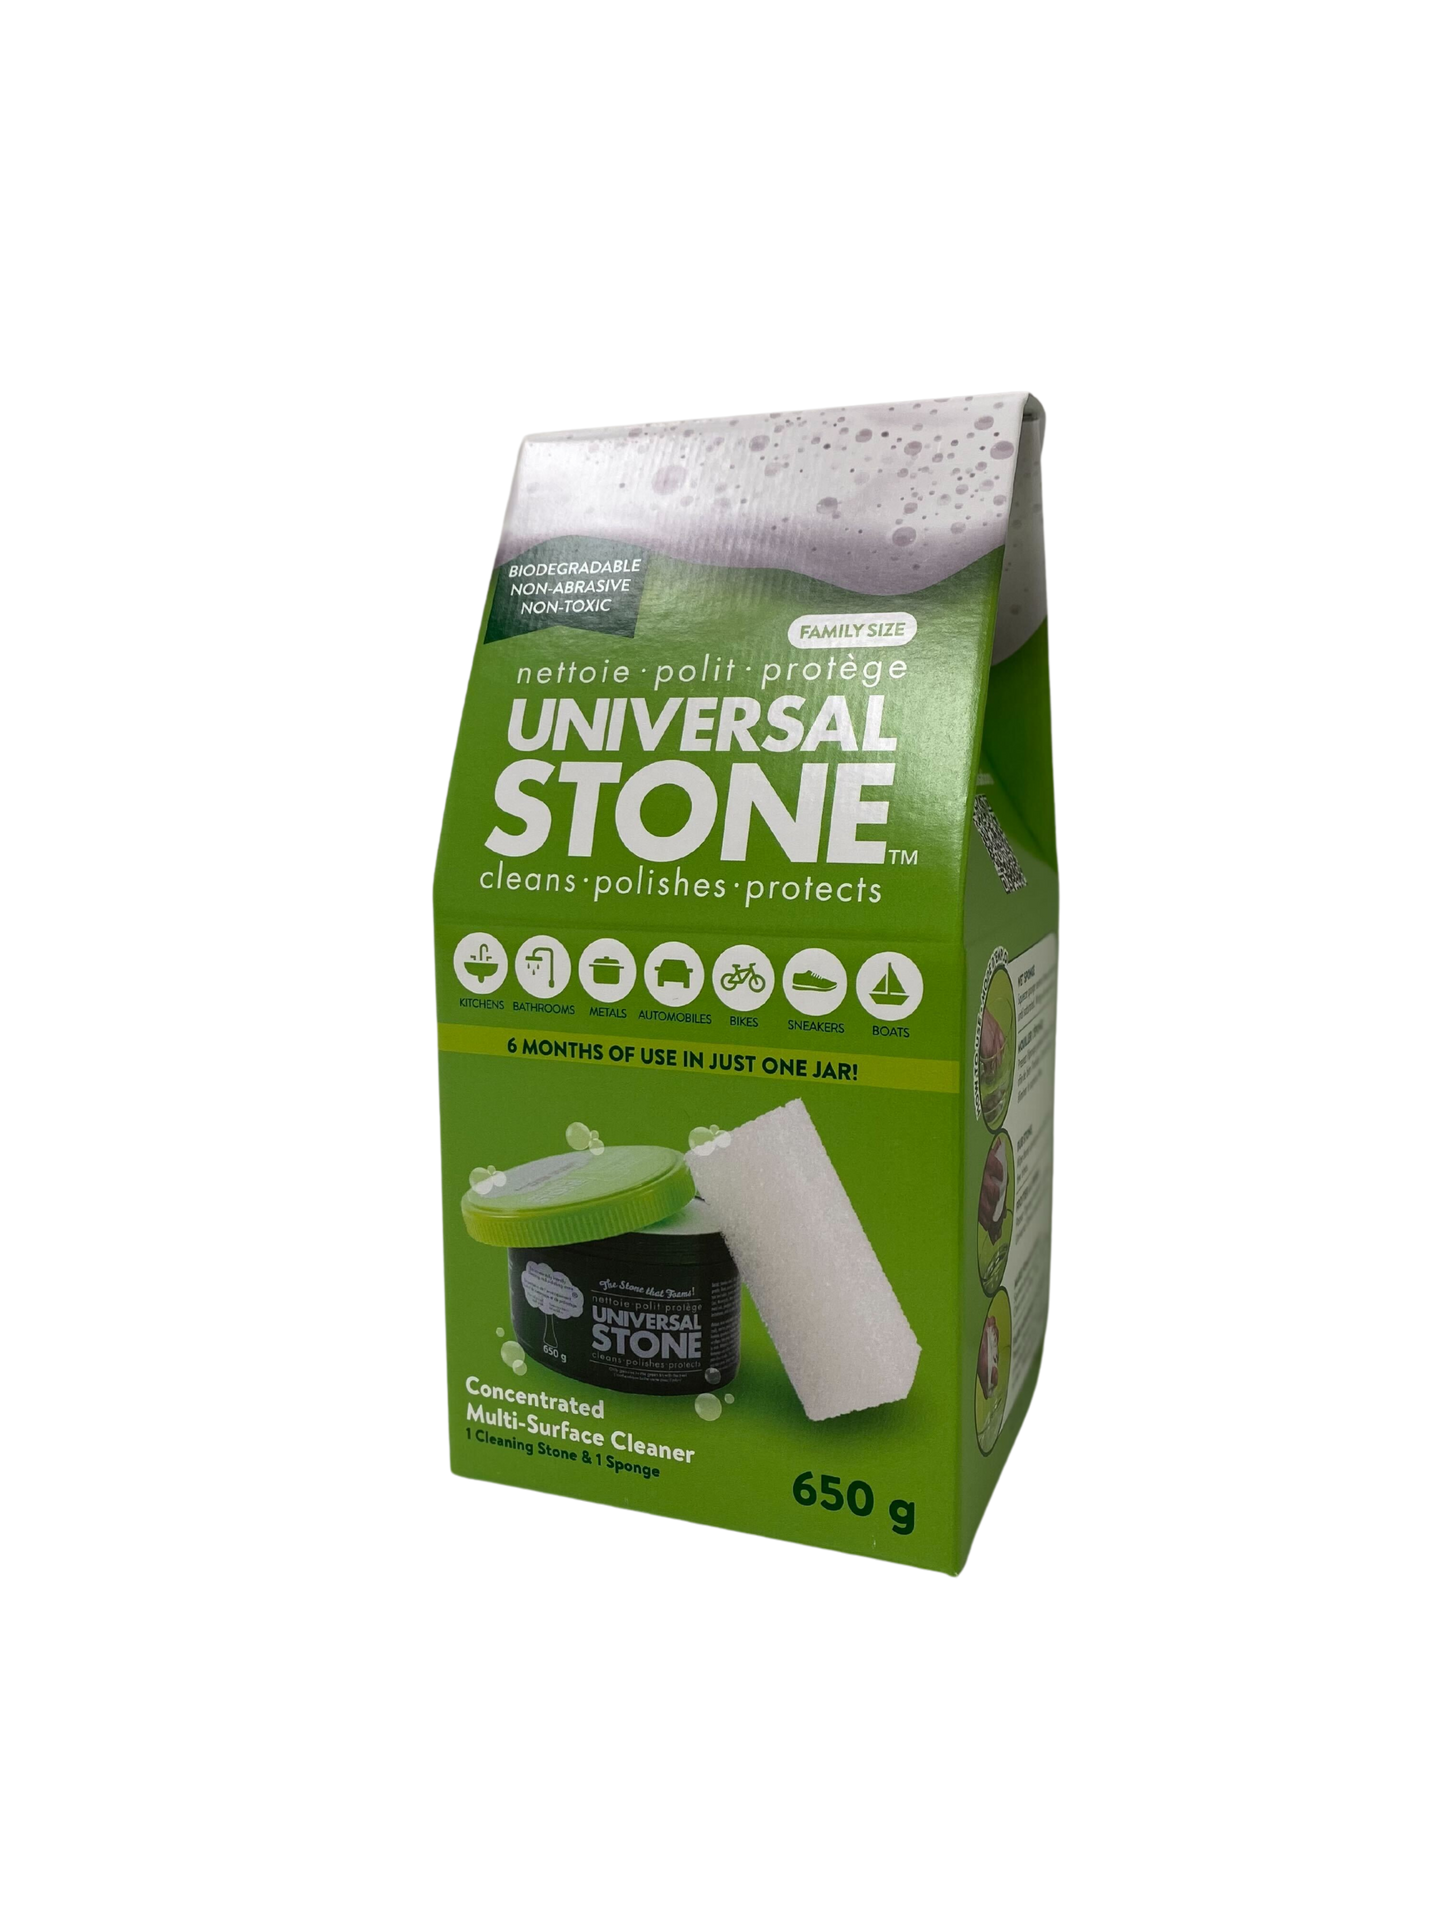 Biodegradable, Eco-Friendly, Non-Toxic Cleaner - Universal Stone 650g